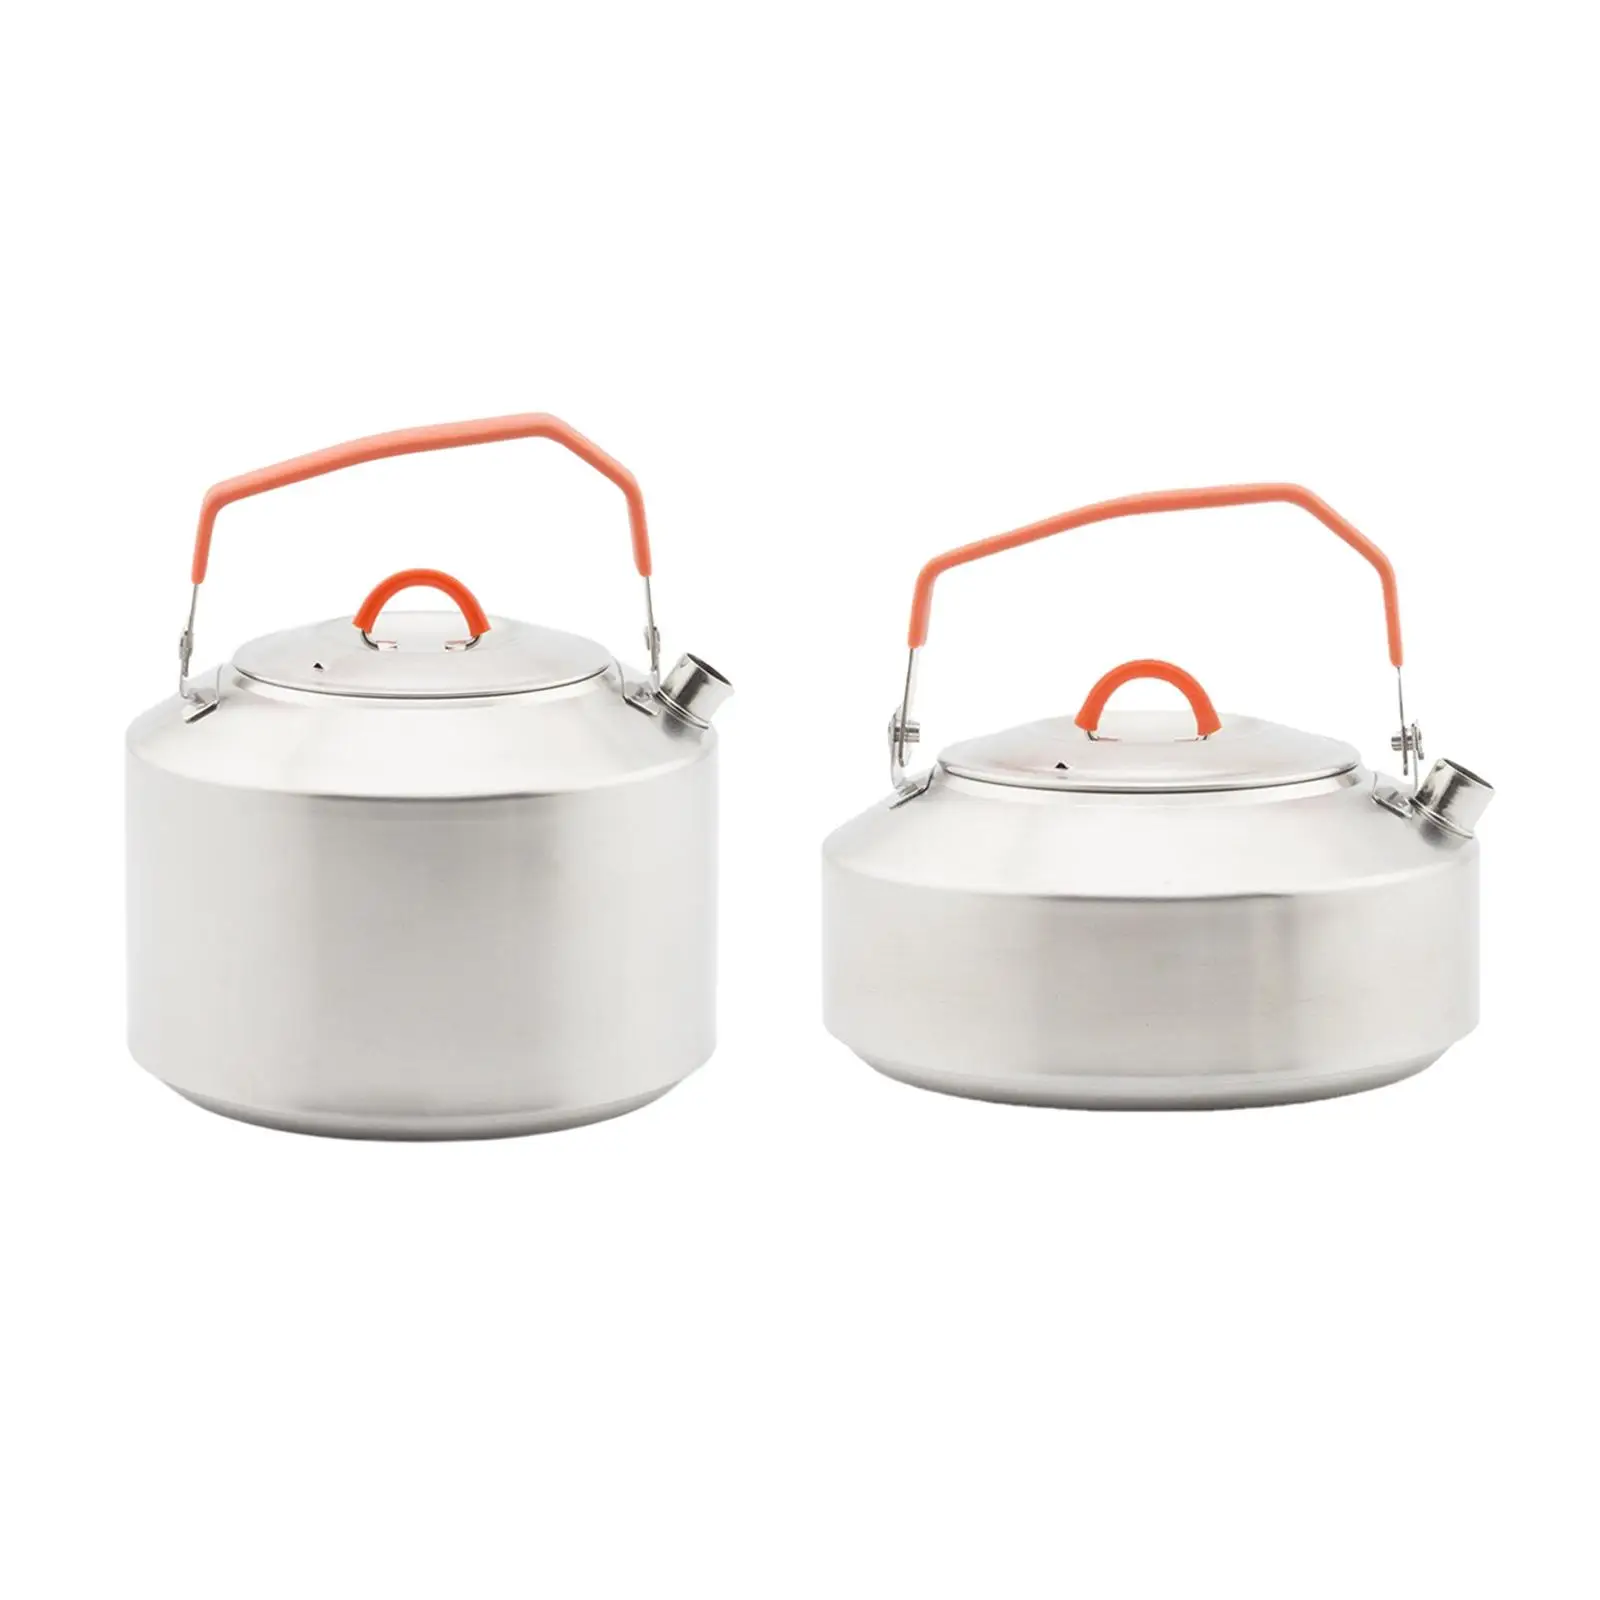 Portable Camping Kettle Camping Teapot for Outdoor Fishing Hiking Backpacking